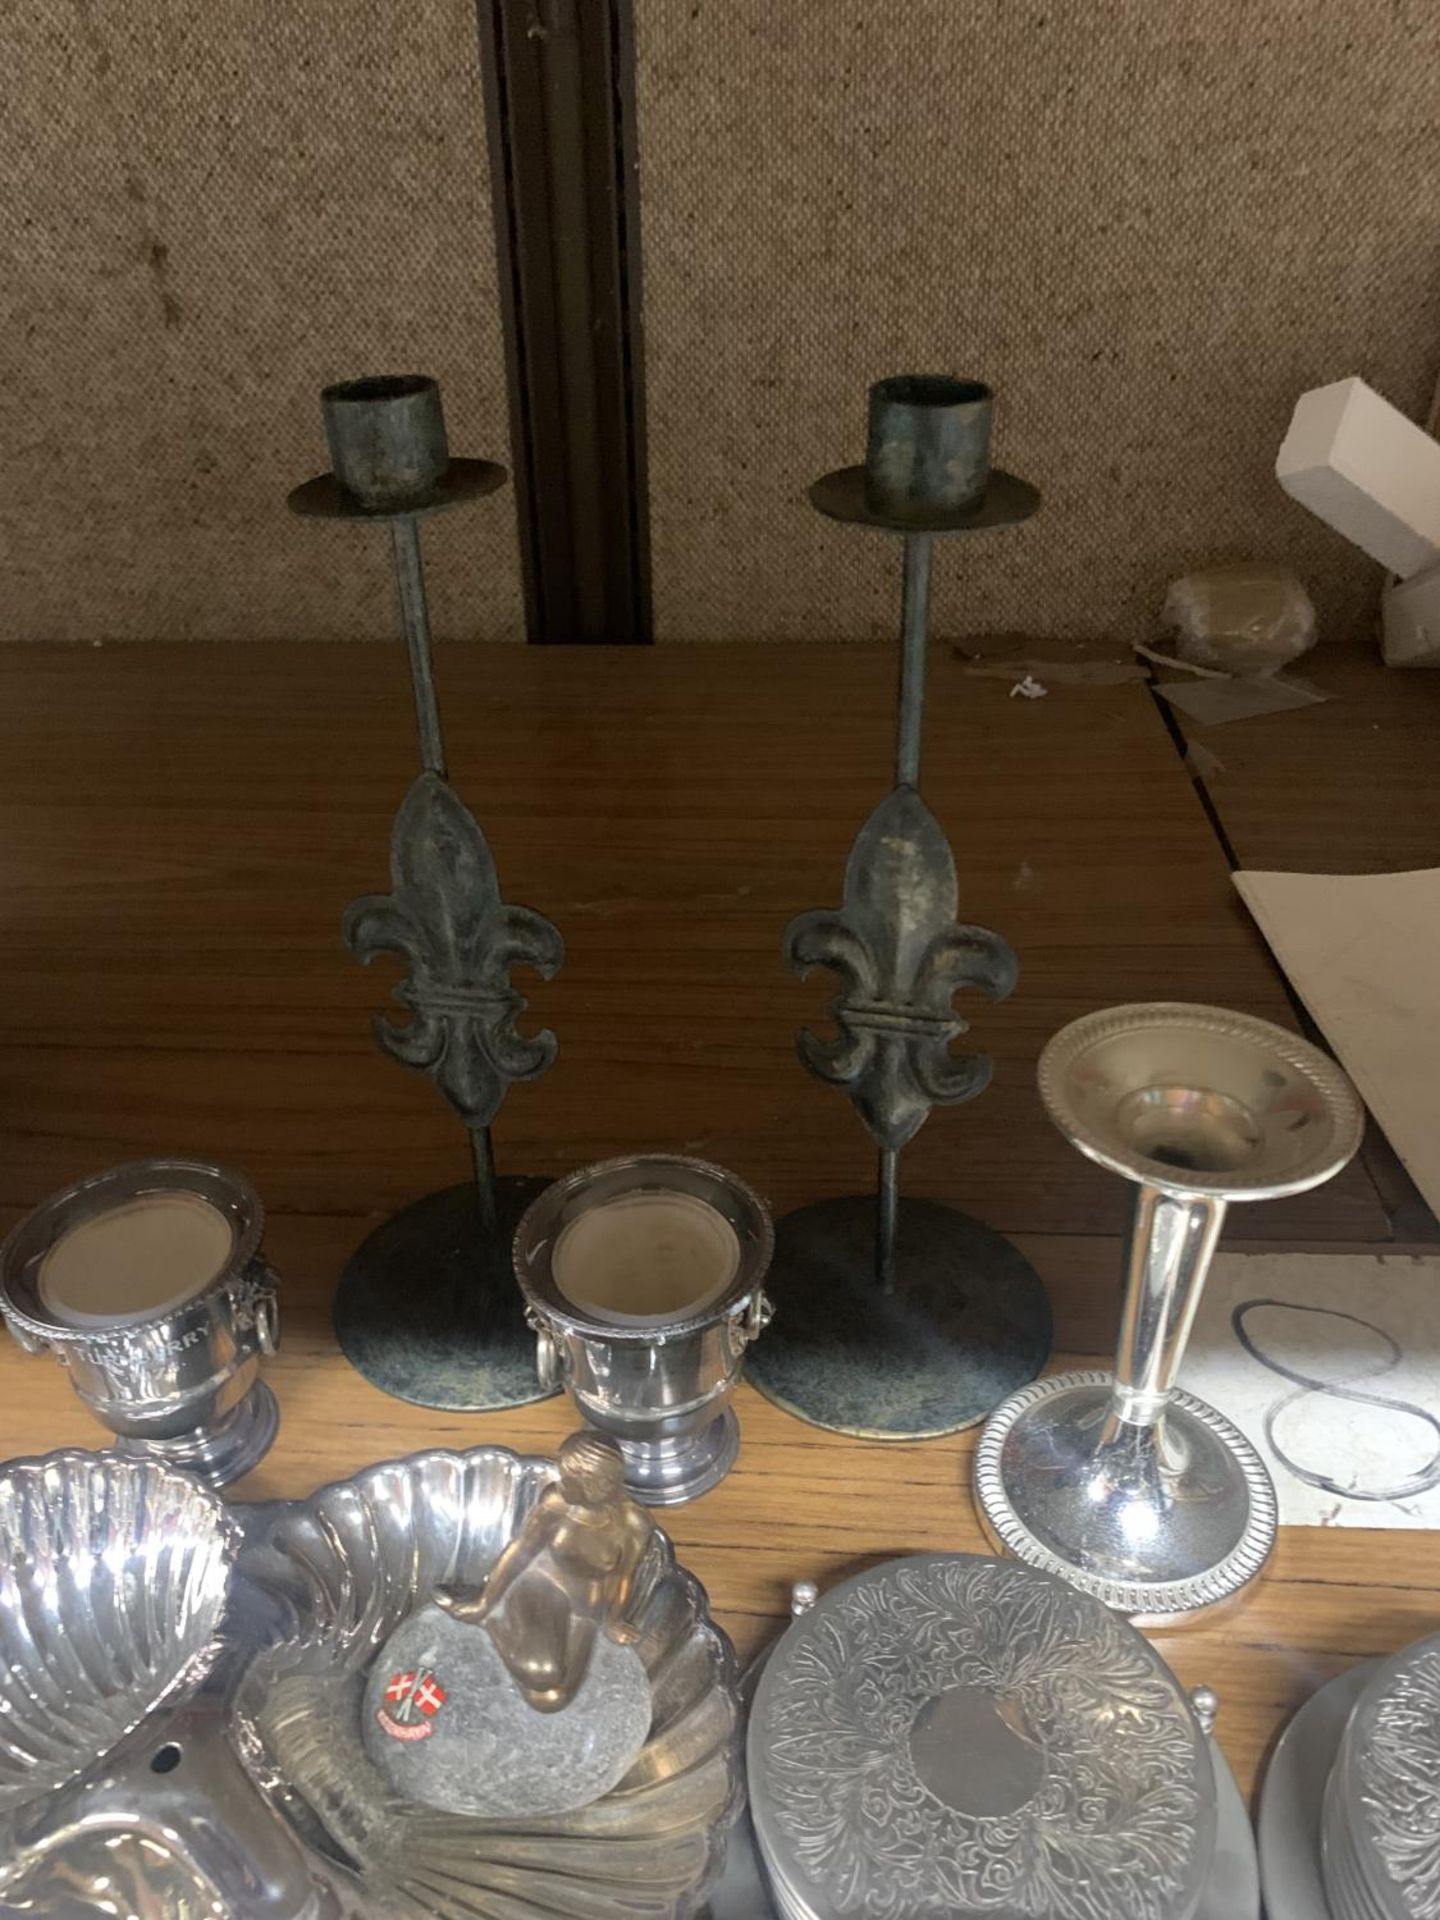 A MIXED LOT TO INCLUDE SILVER PLATED CANDLEHOLDERS, COASTERS, A SERVING DISH PLUS A CRANBERRY - Image 4 of 4